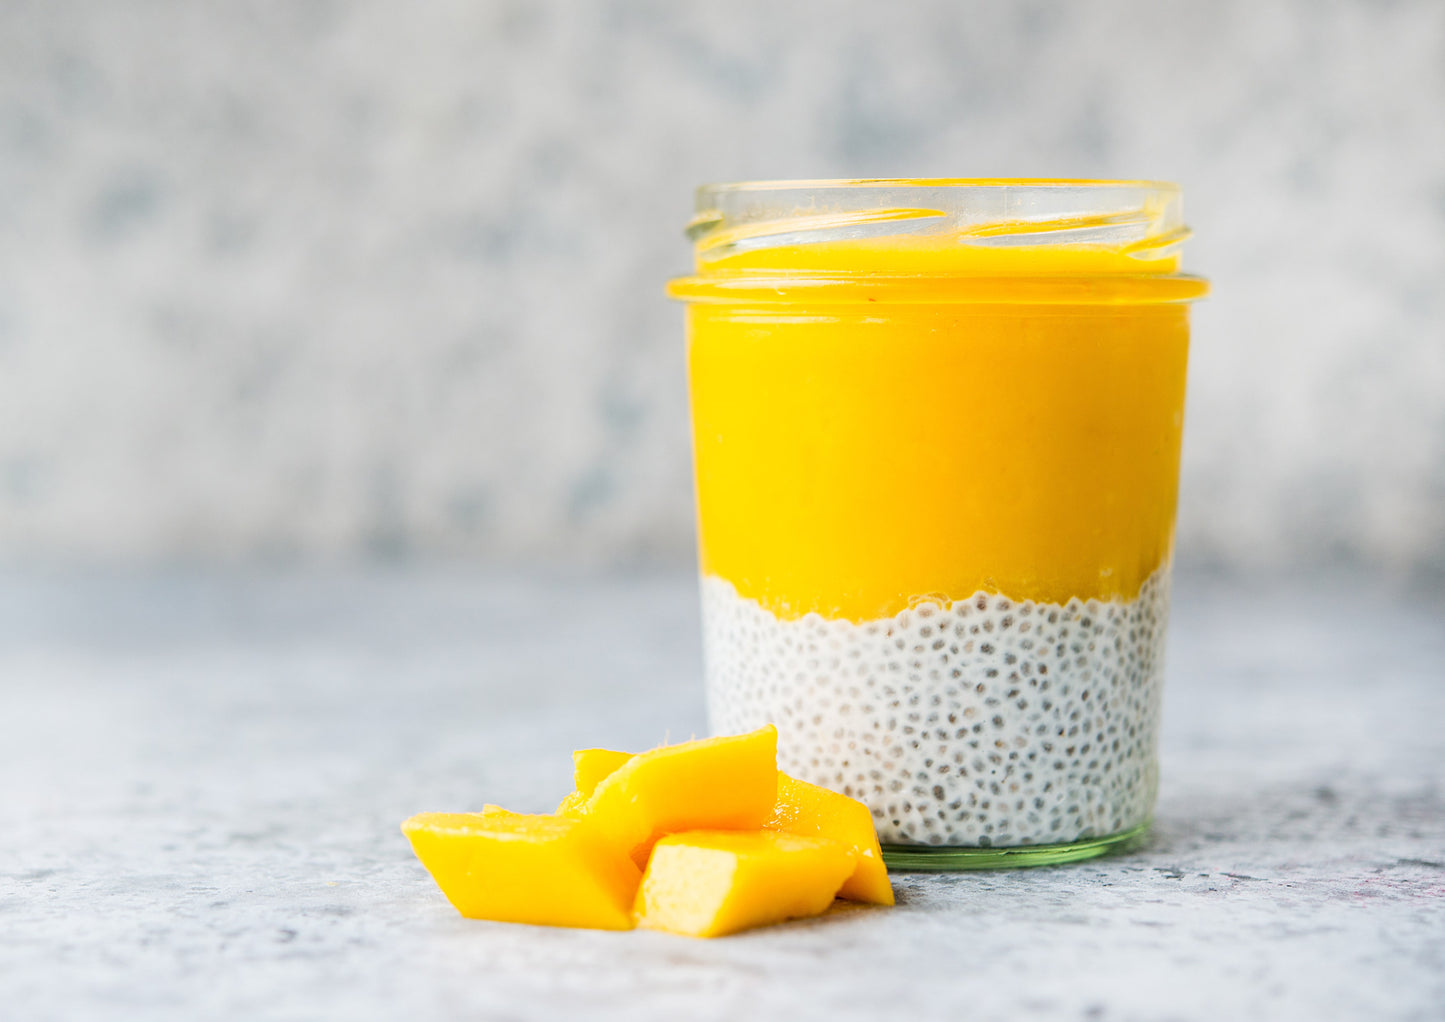 Mango Powder - Made from Raw Dried Fruit, Unsulfured, Vegan, Bulk, Great for Baking, Juices, Smoothies, Yogurts, and Instant Breakfast Drinks, No Sulphites - by Food to Live